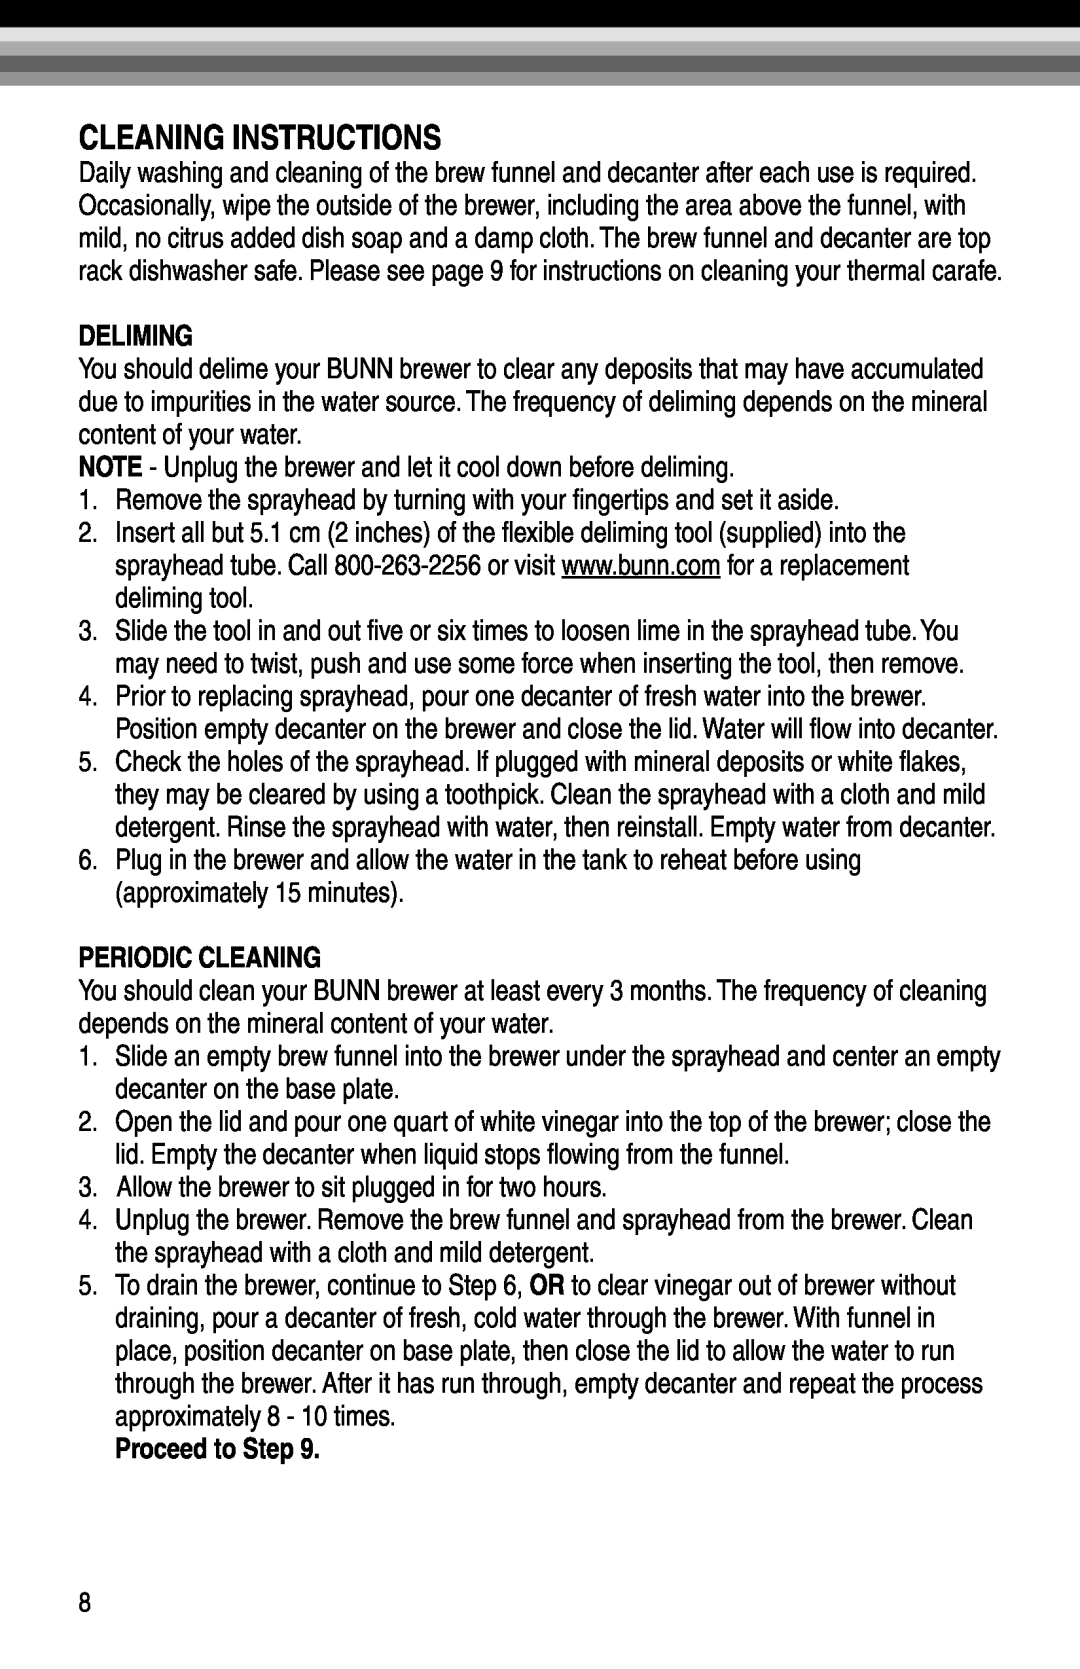 Bunn GRX-W, GRX-B, BX-W manual Cleaning Instructions, Deliming, Periodic Cleaning, Proceed to Step 